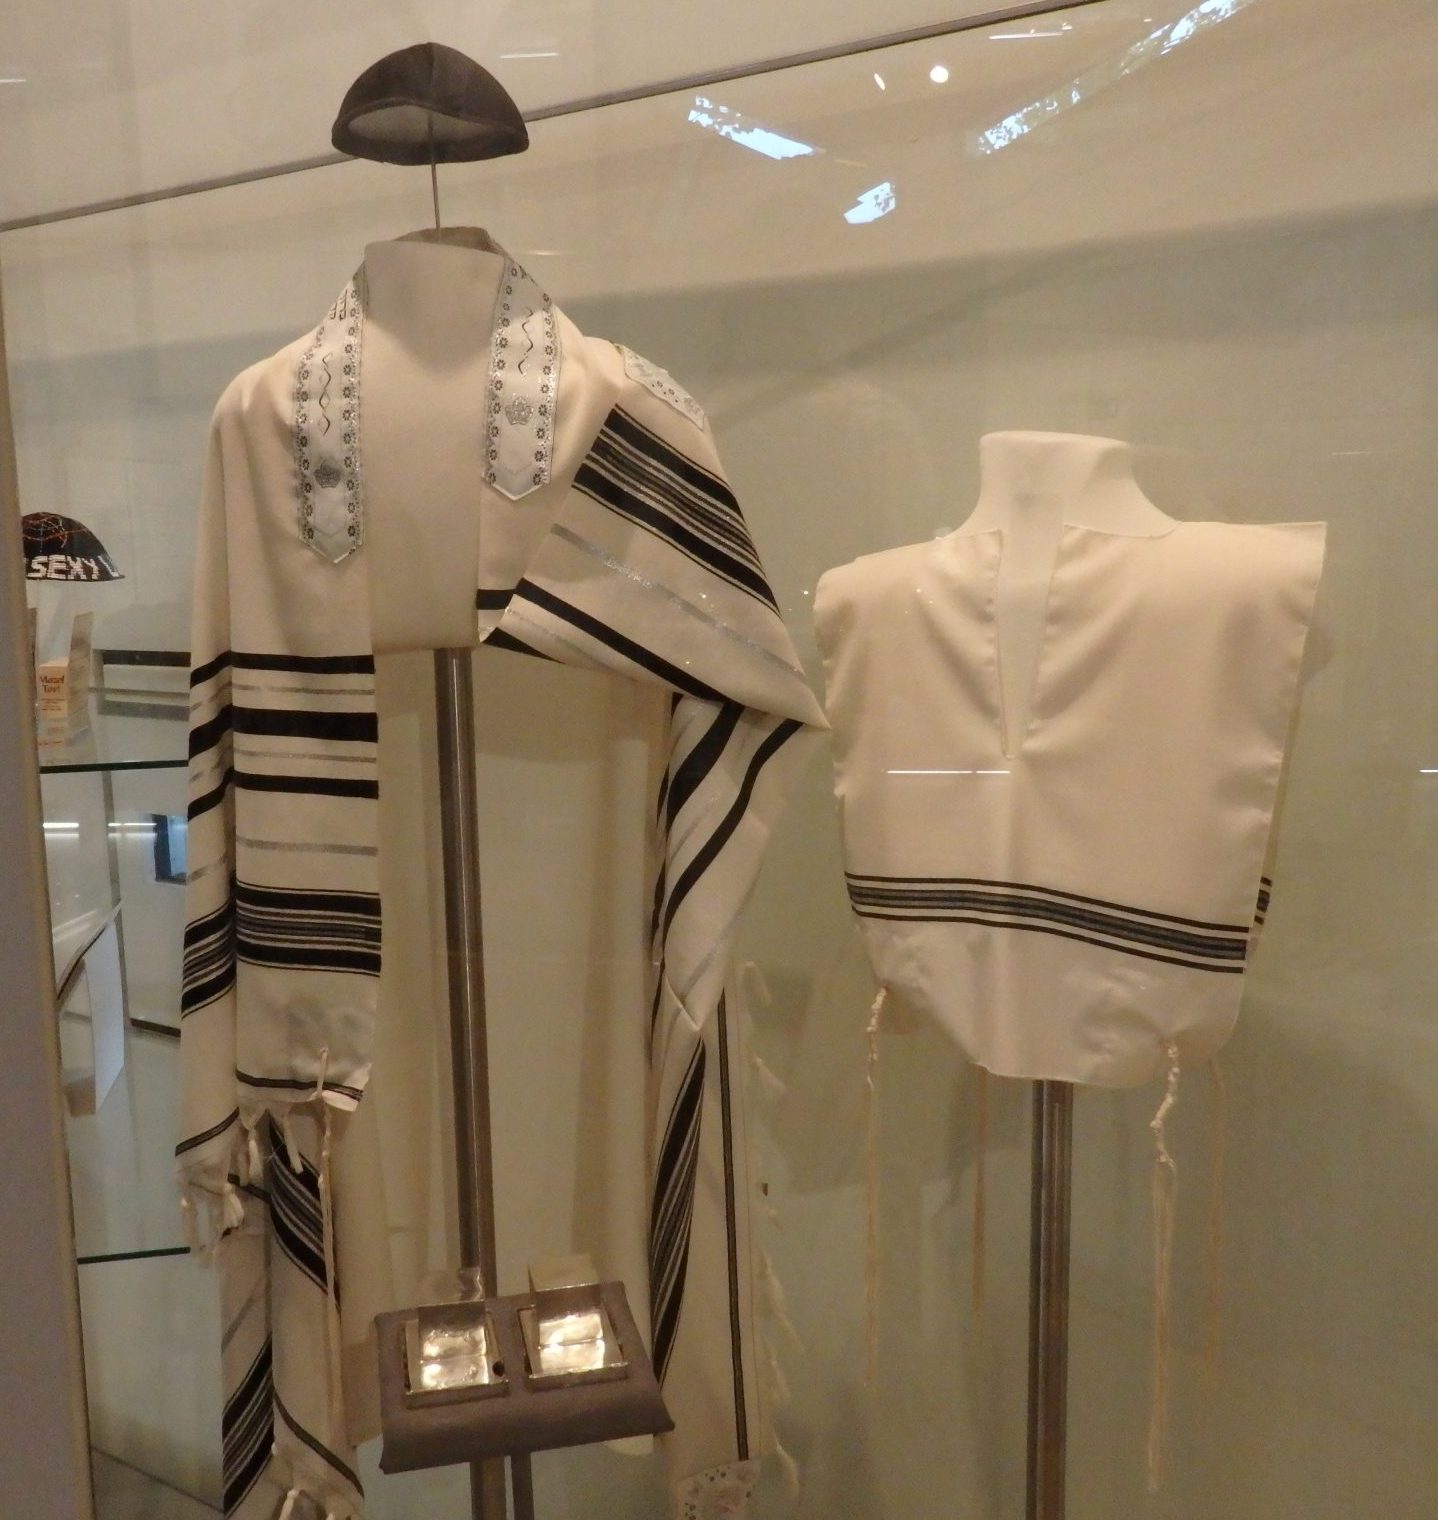 Jewish prayer shawls, called tallit. The museum includes explanations of Jewish culture and tradition, as well as tracing how it changed over time. Jewish Museum Berlin